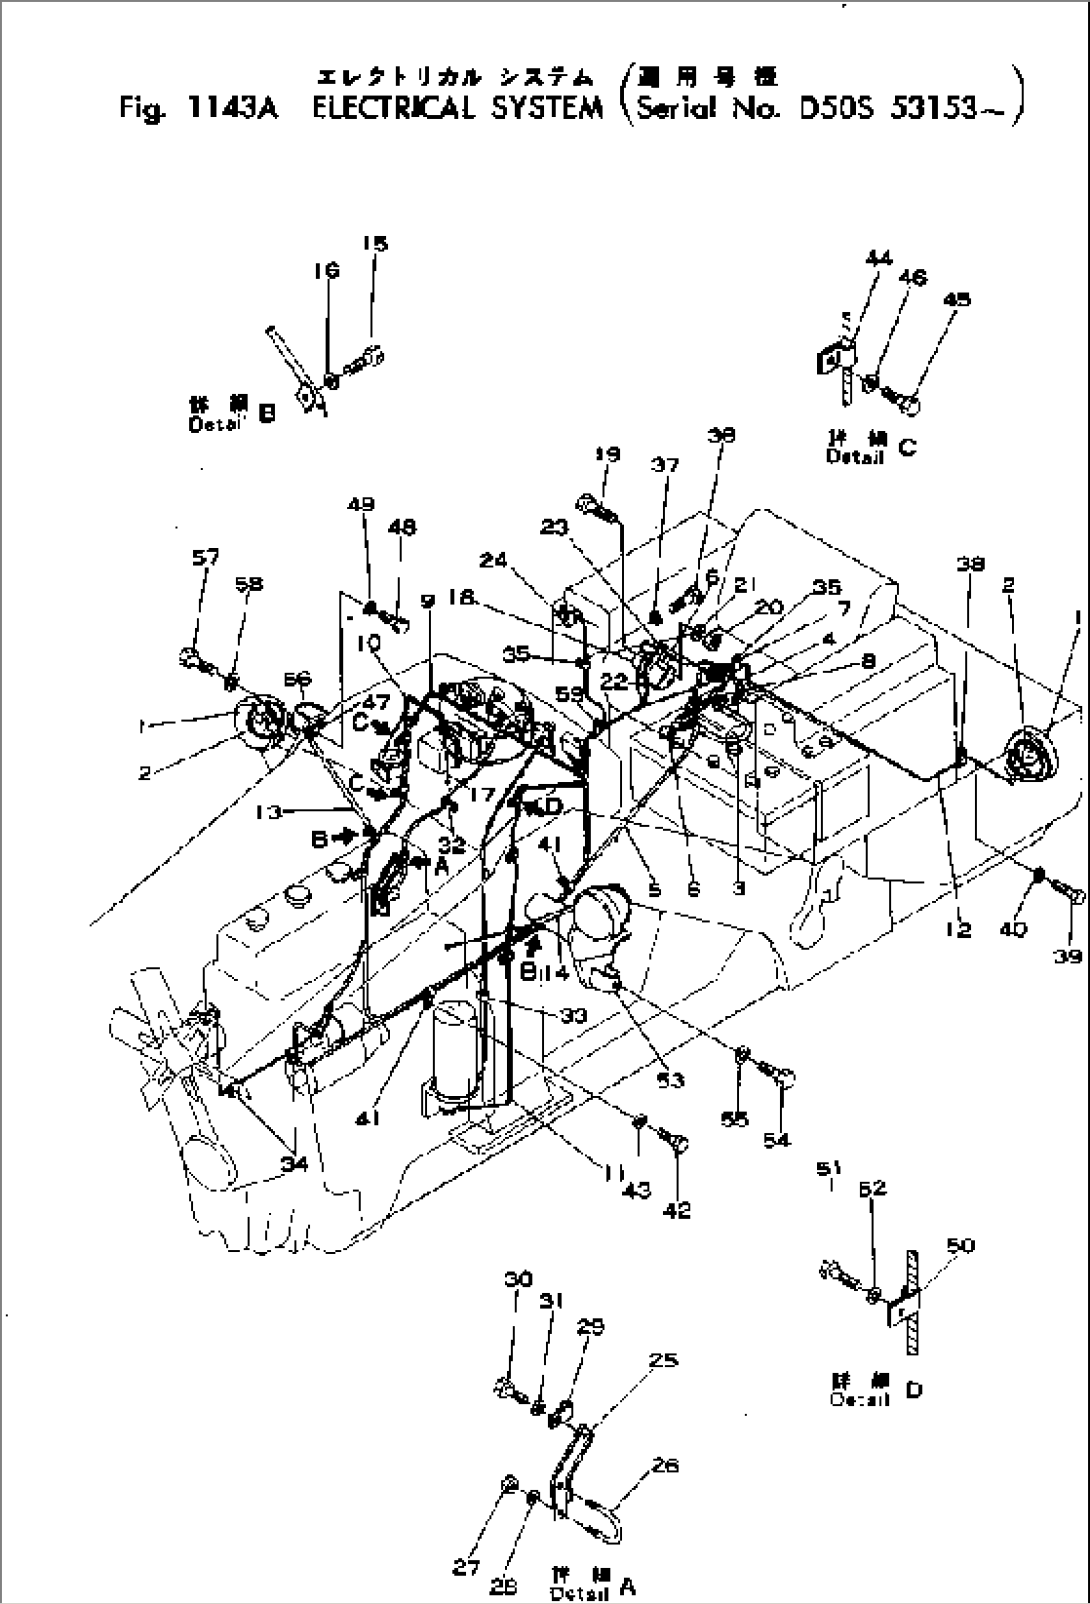 ELECTRICAL SYSTEM(#53153-)